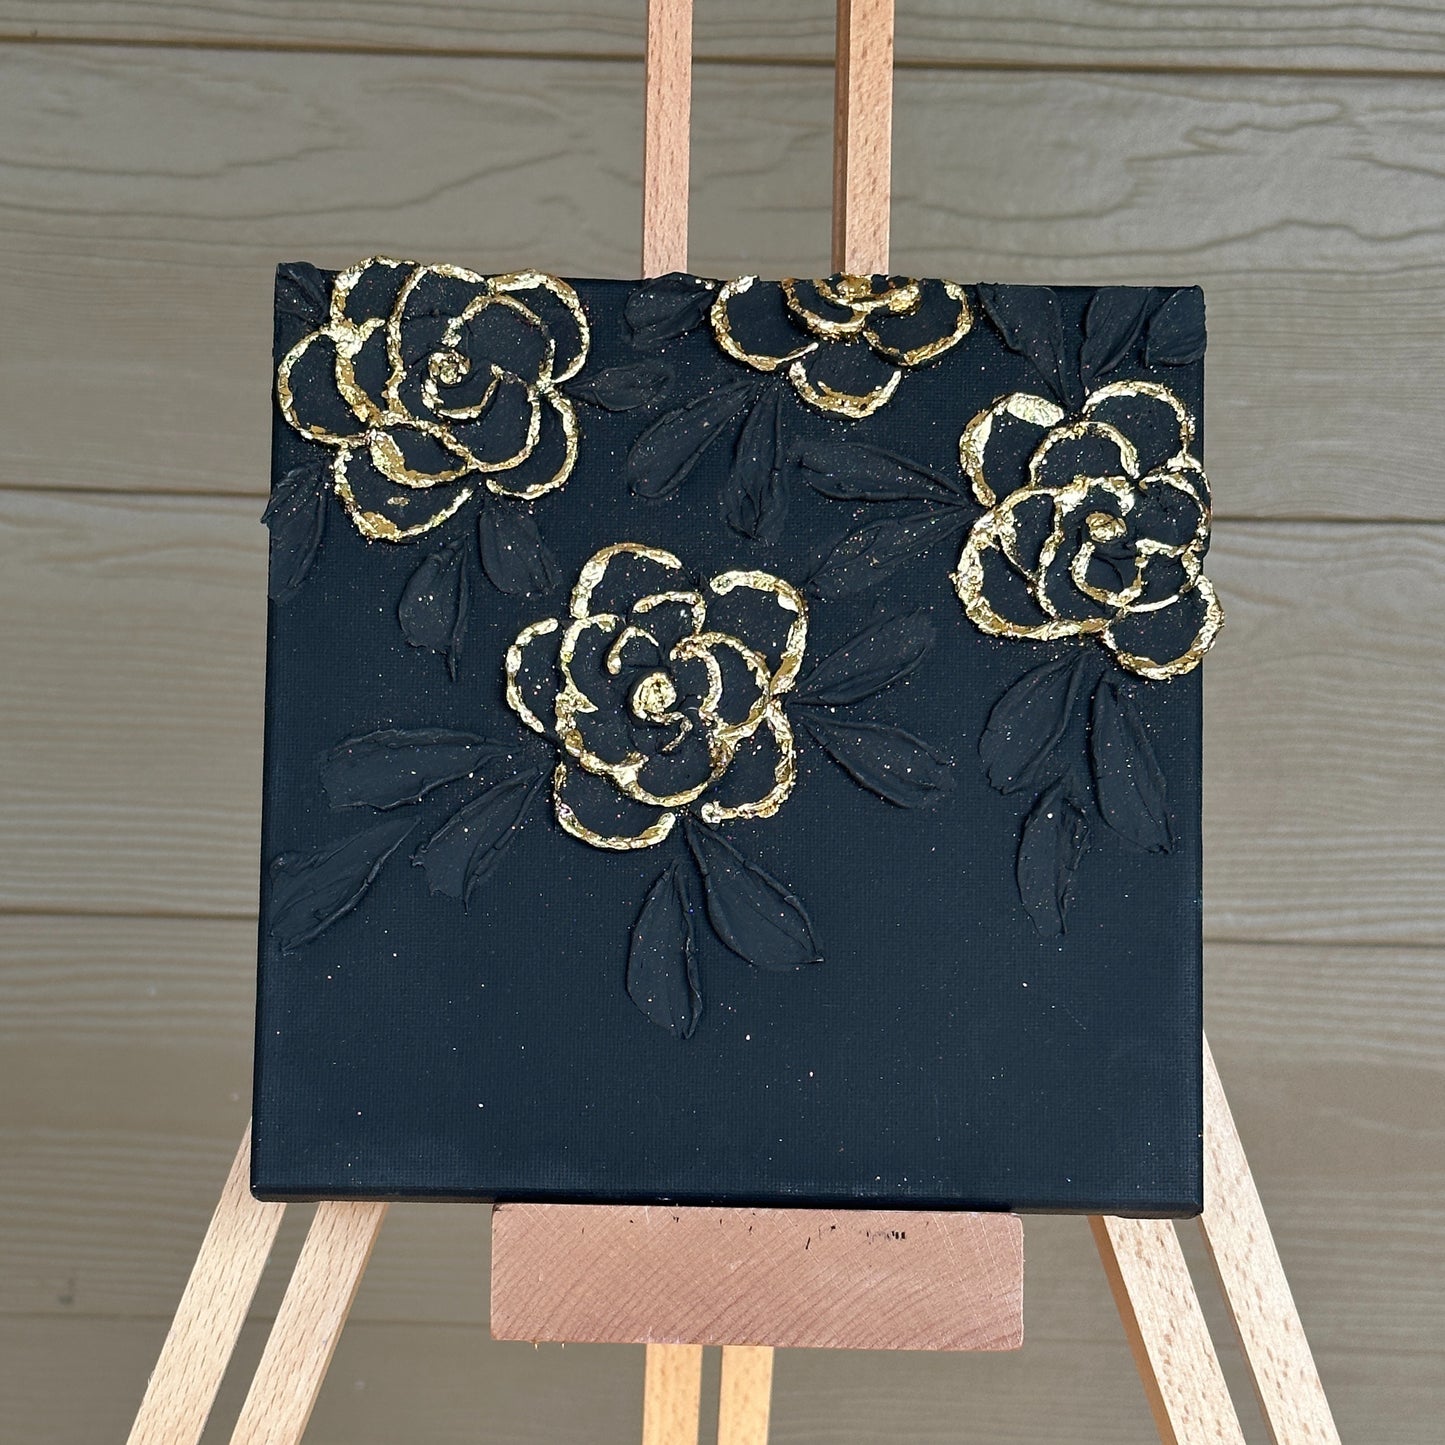 3D Texture Black Roses with Gold Foil on Black 8"x8"